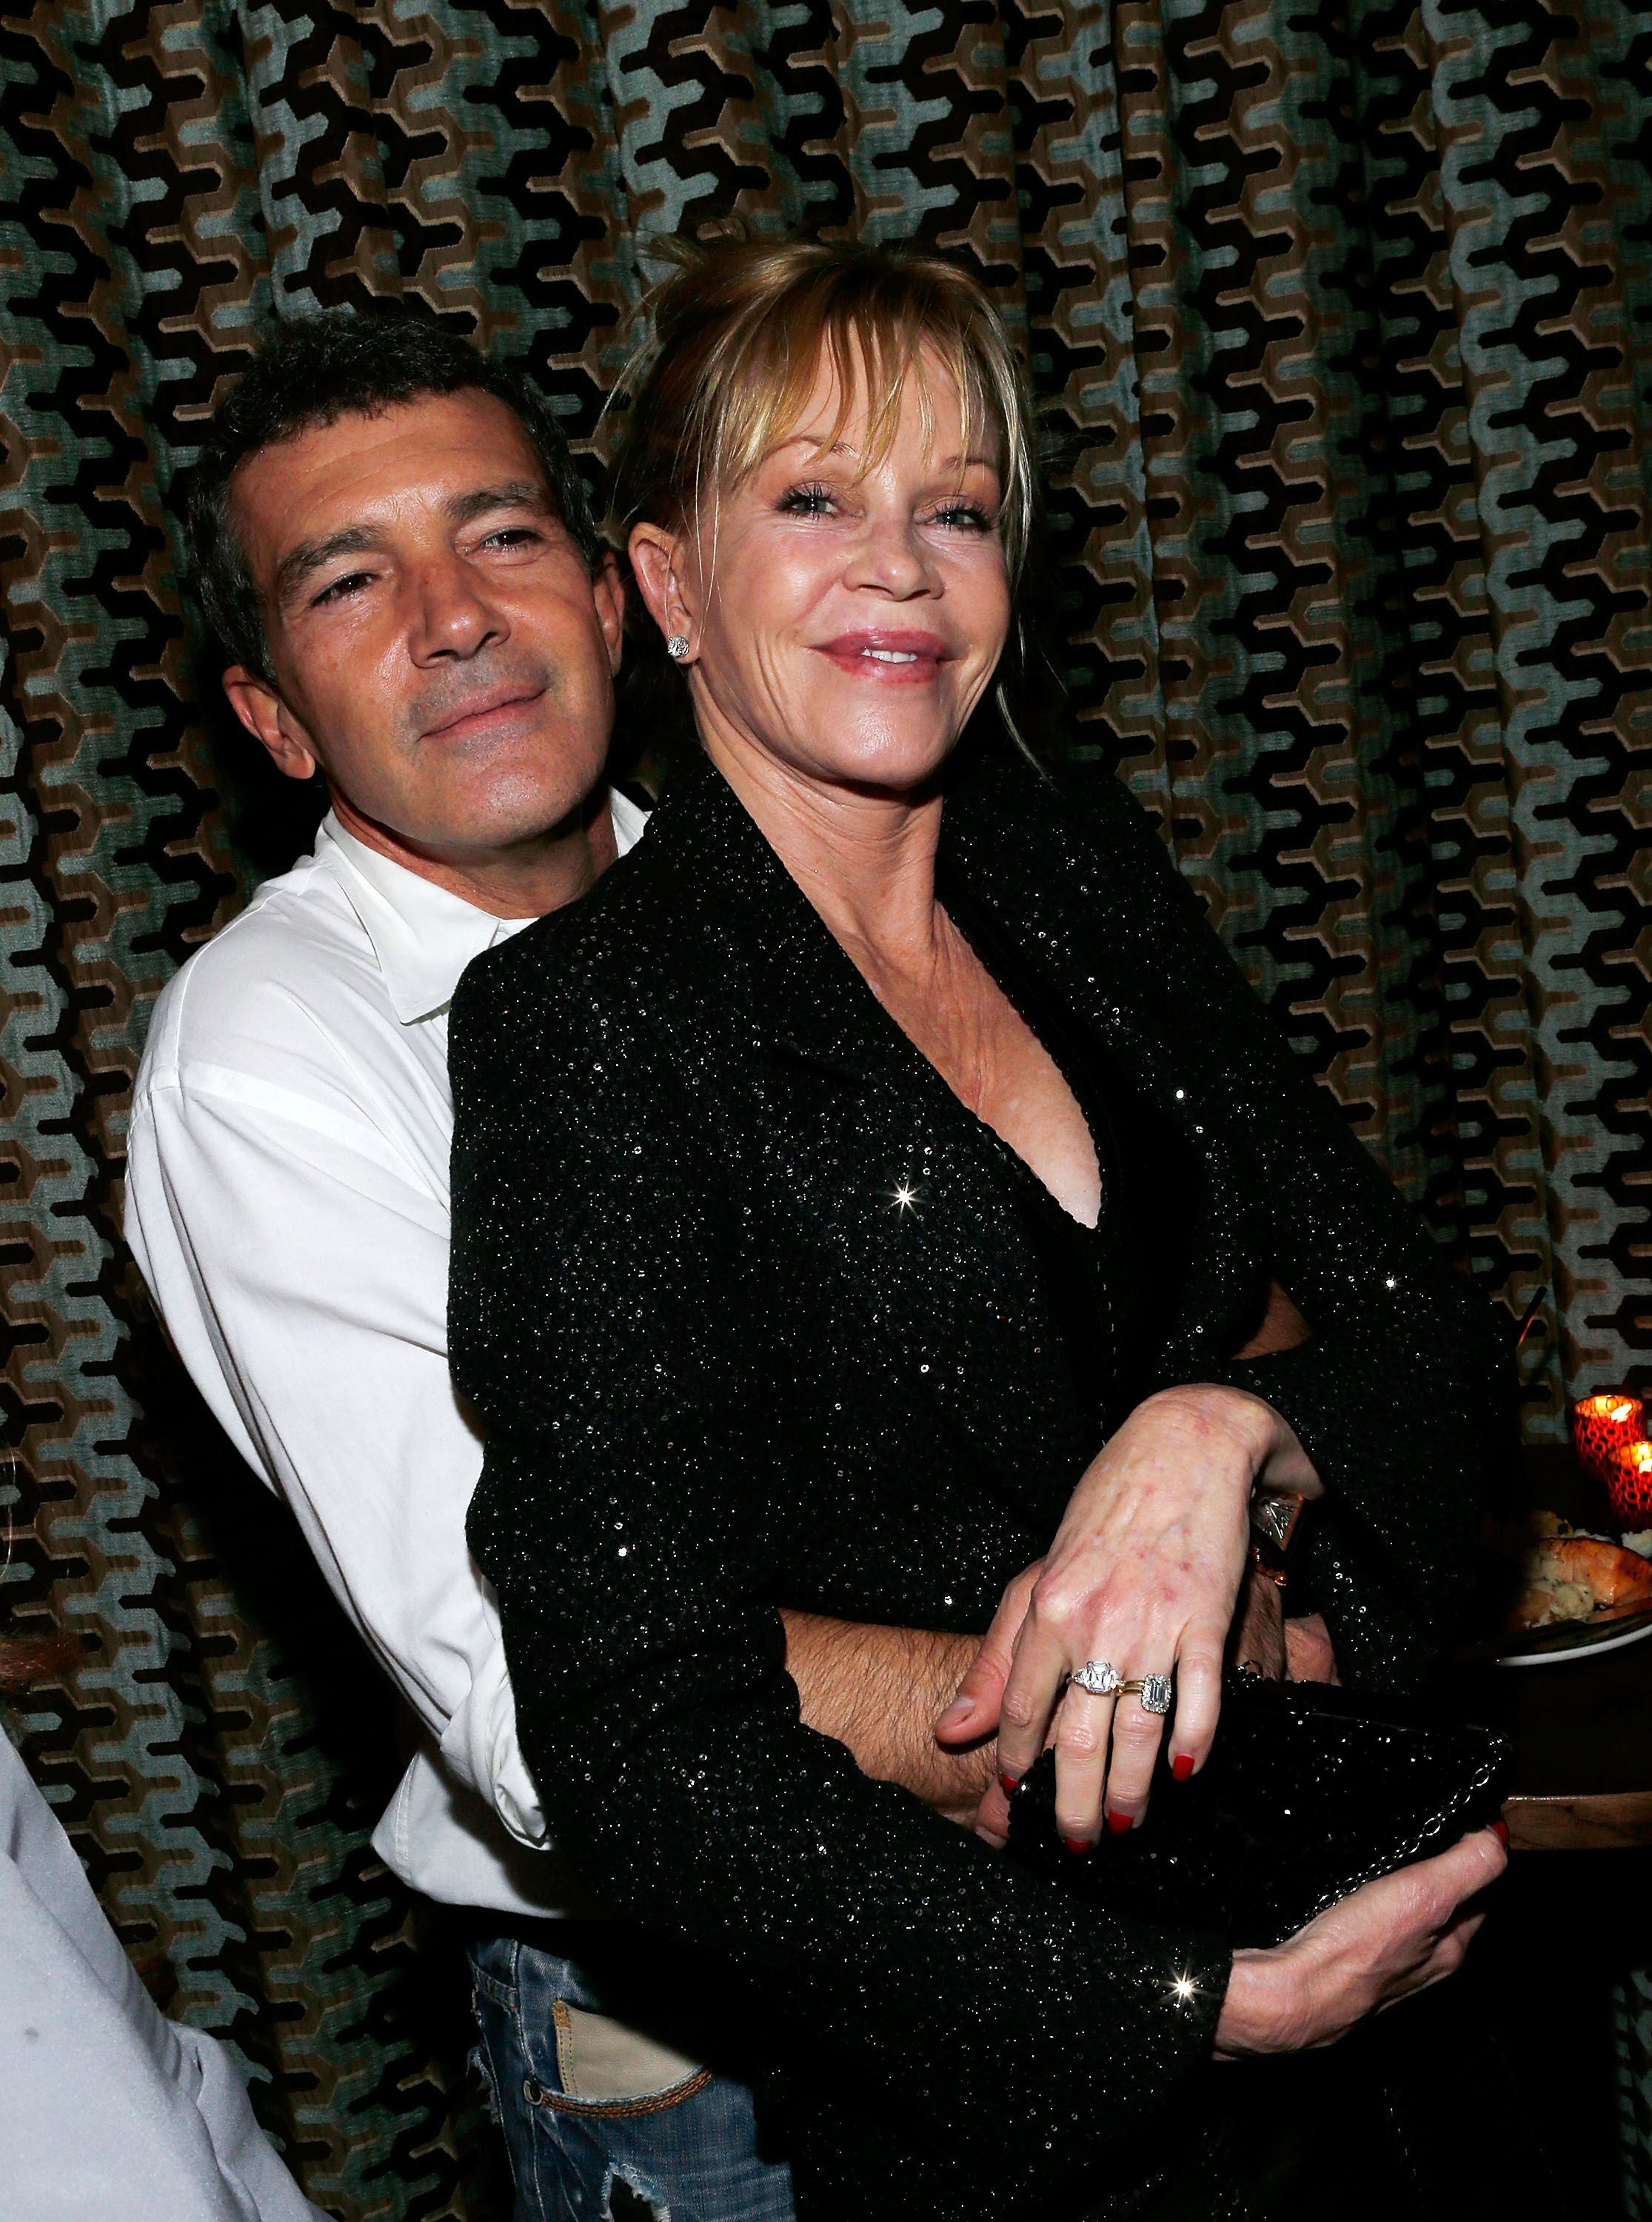 Actor Antonio Banderas and actress Melanie Griffith attend the after party for the "Black Nativity" premiere at The Red Rooster on November 18, 2013 in New York City | Photo: Getty Images